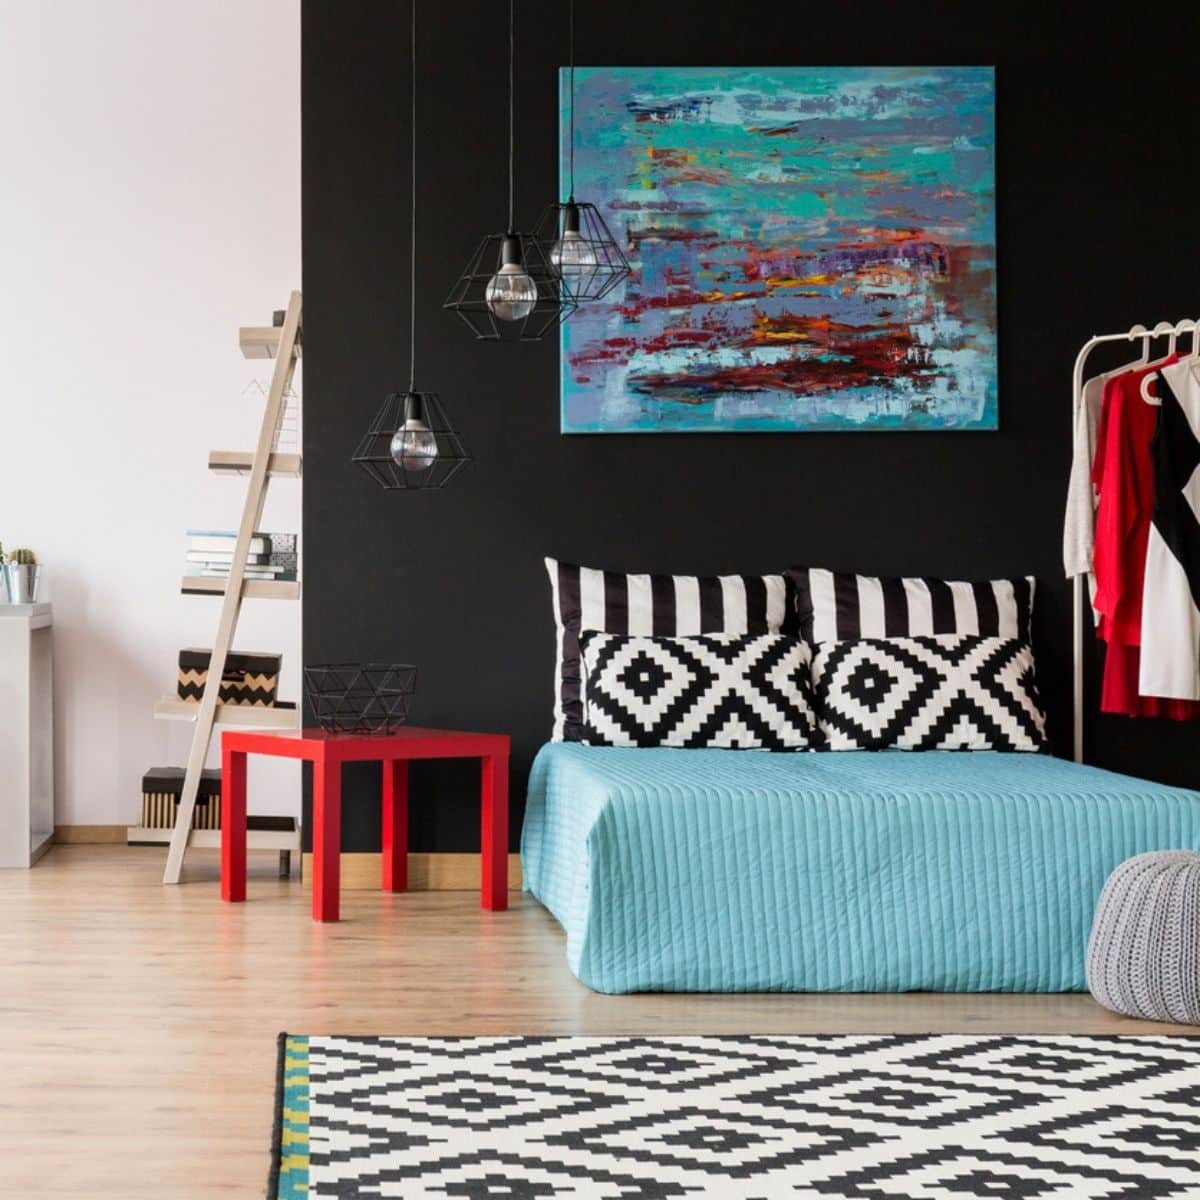 a teal bedroom with black, white, and red decor and furniture